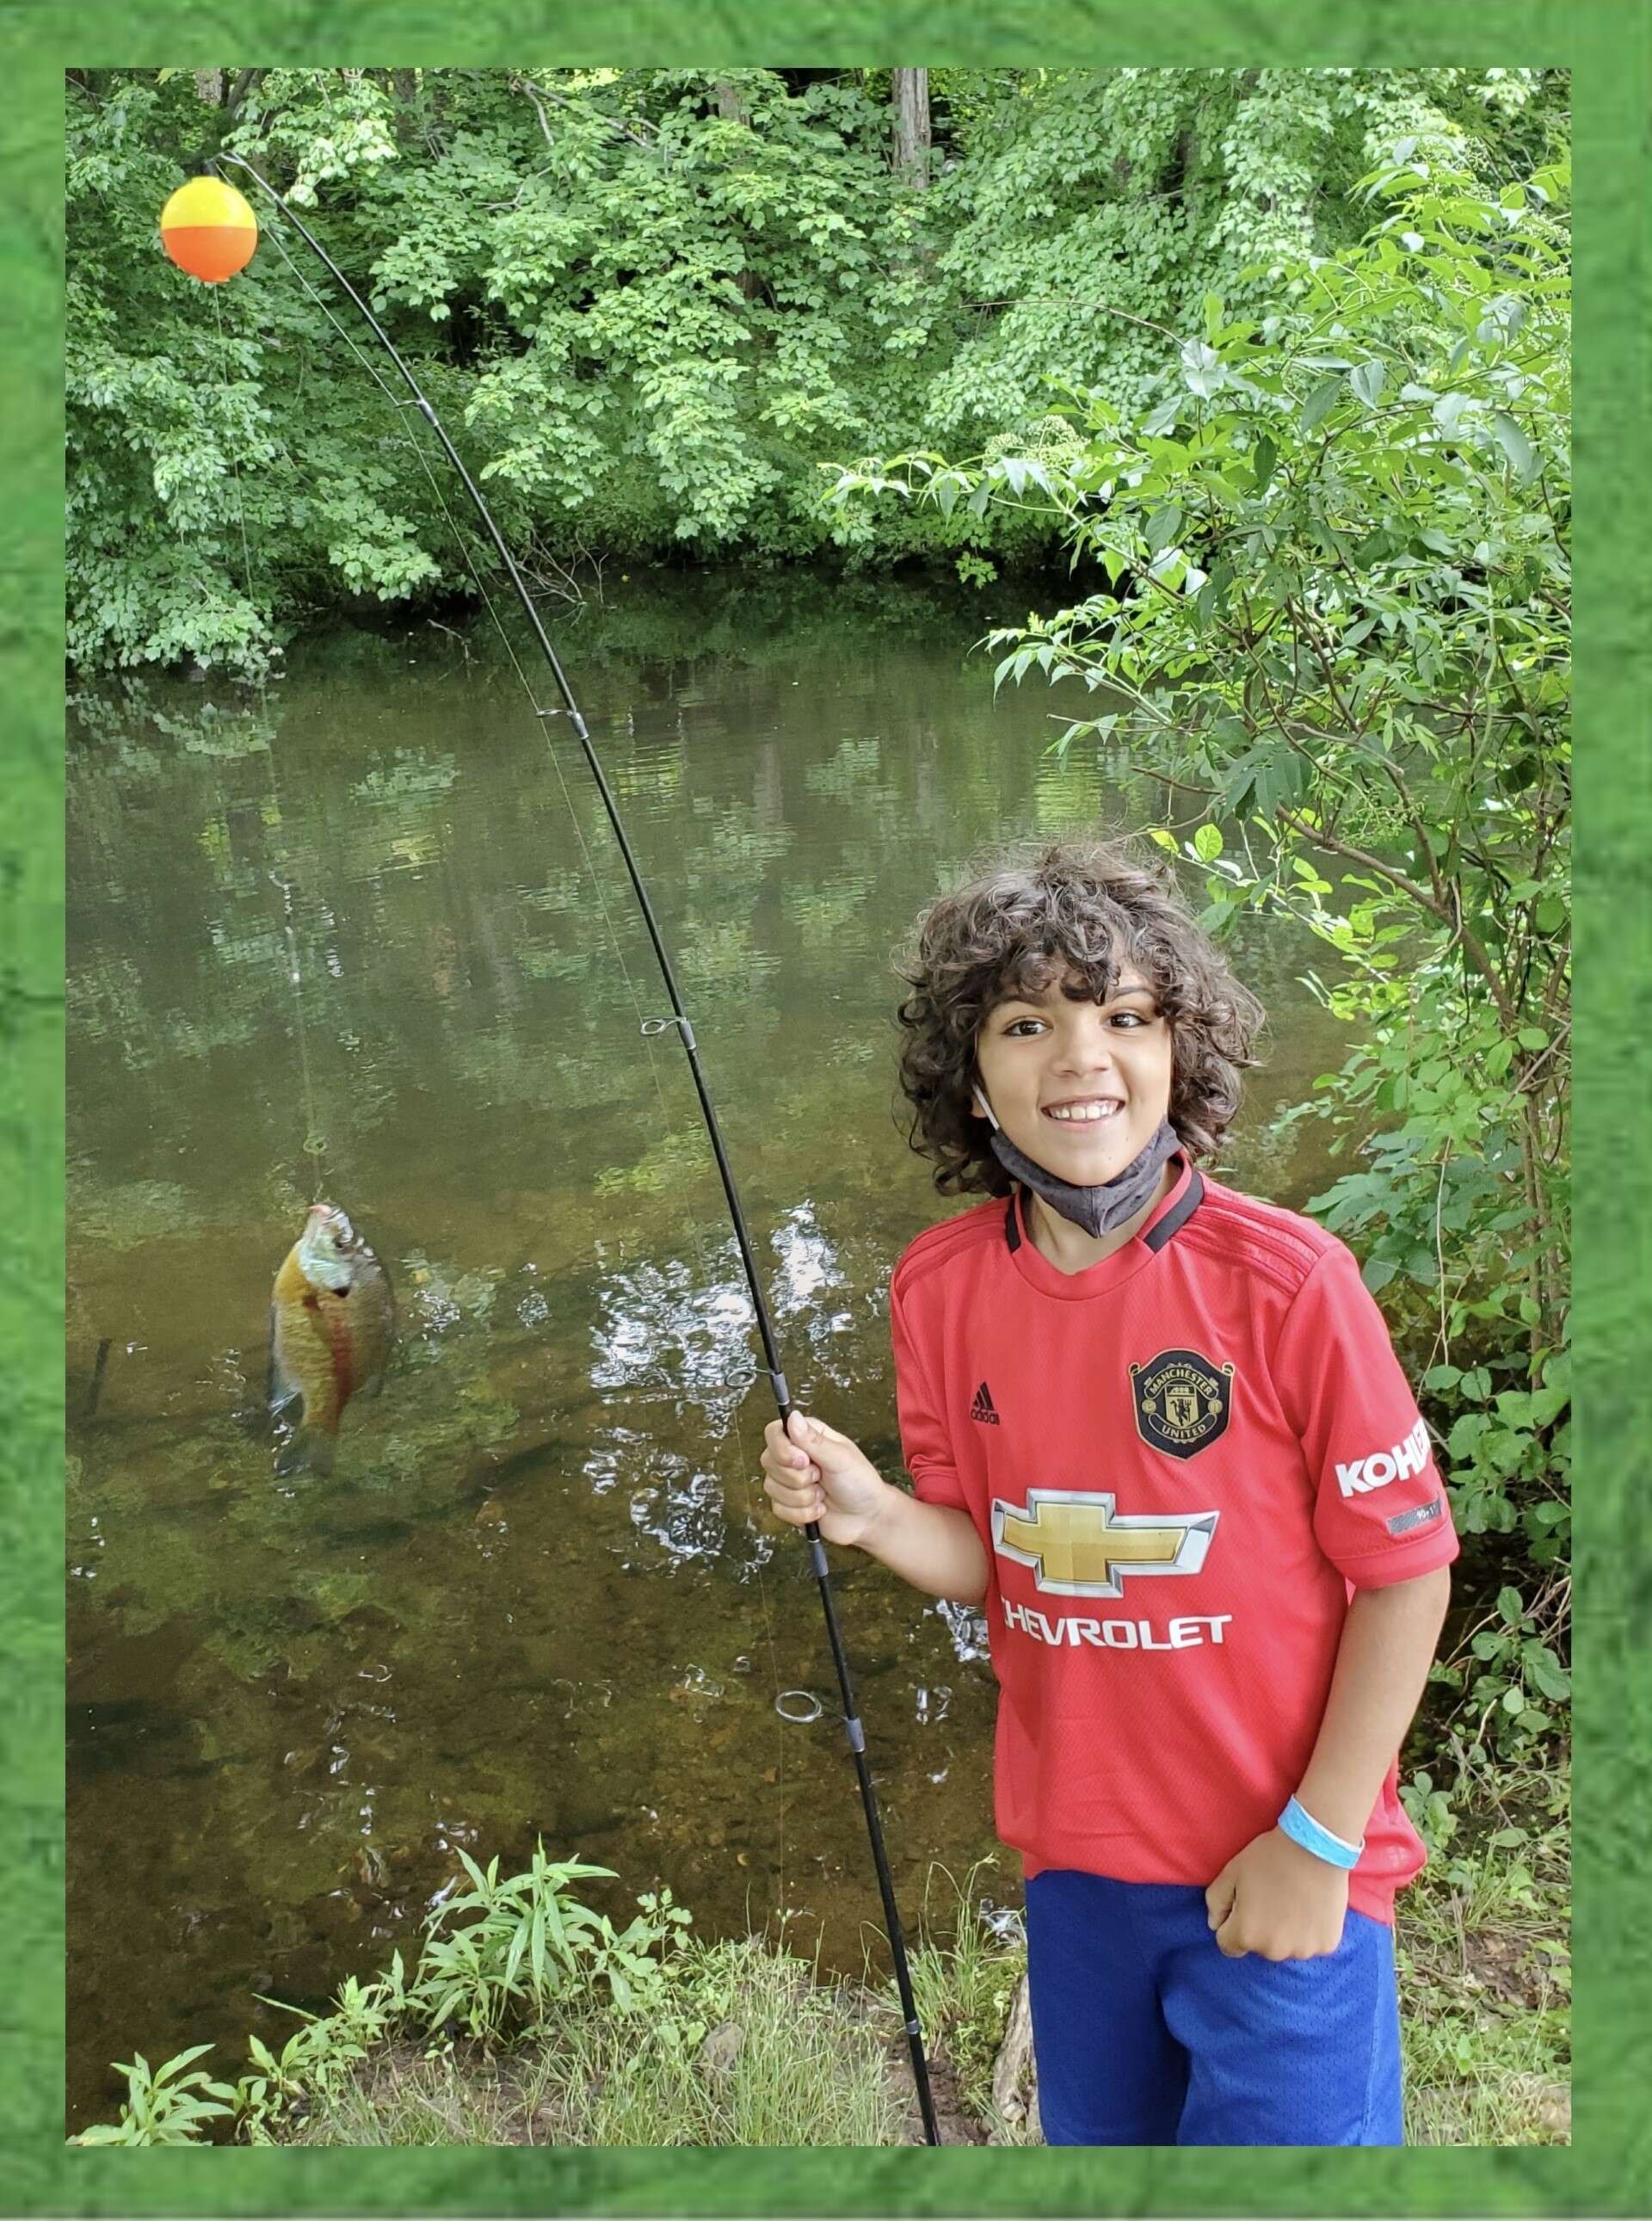 Do You Remember Catching Your First Fish?